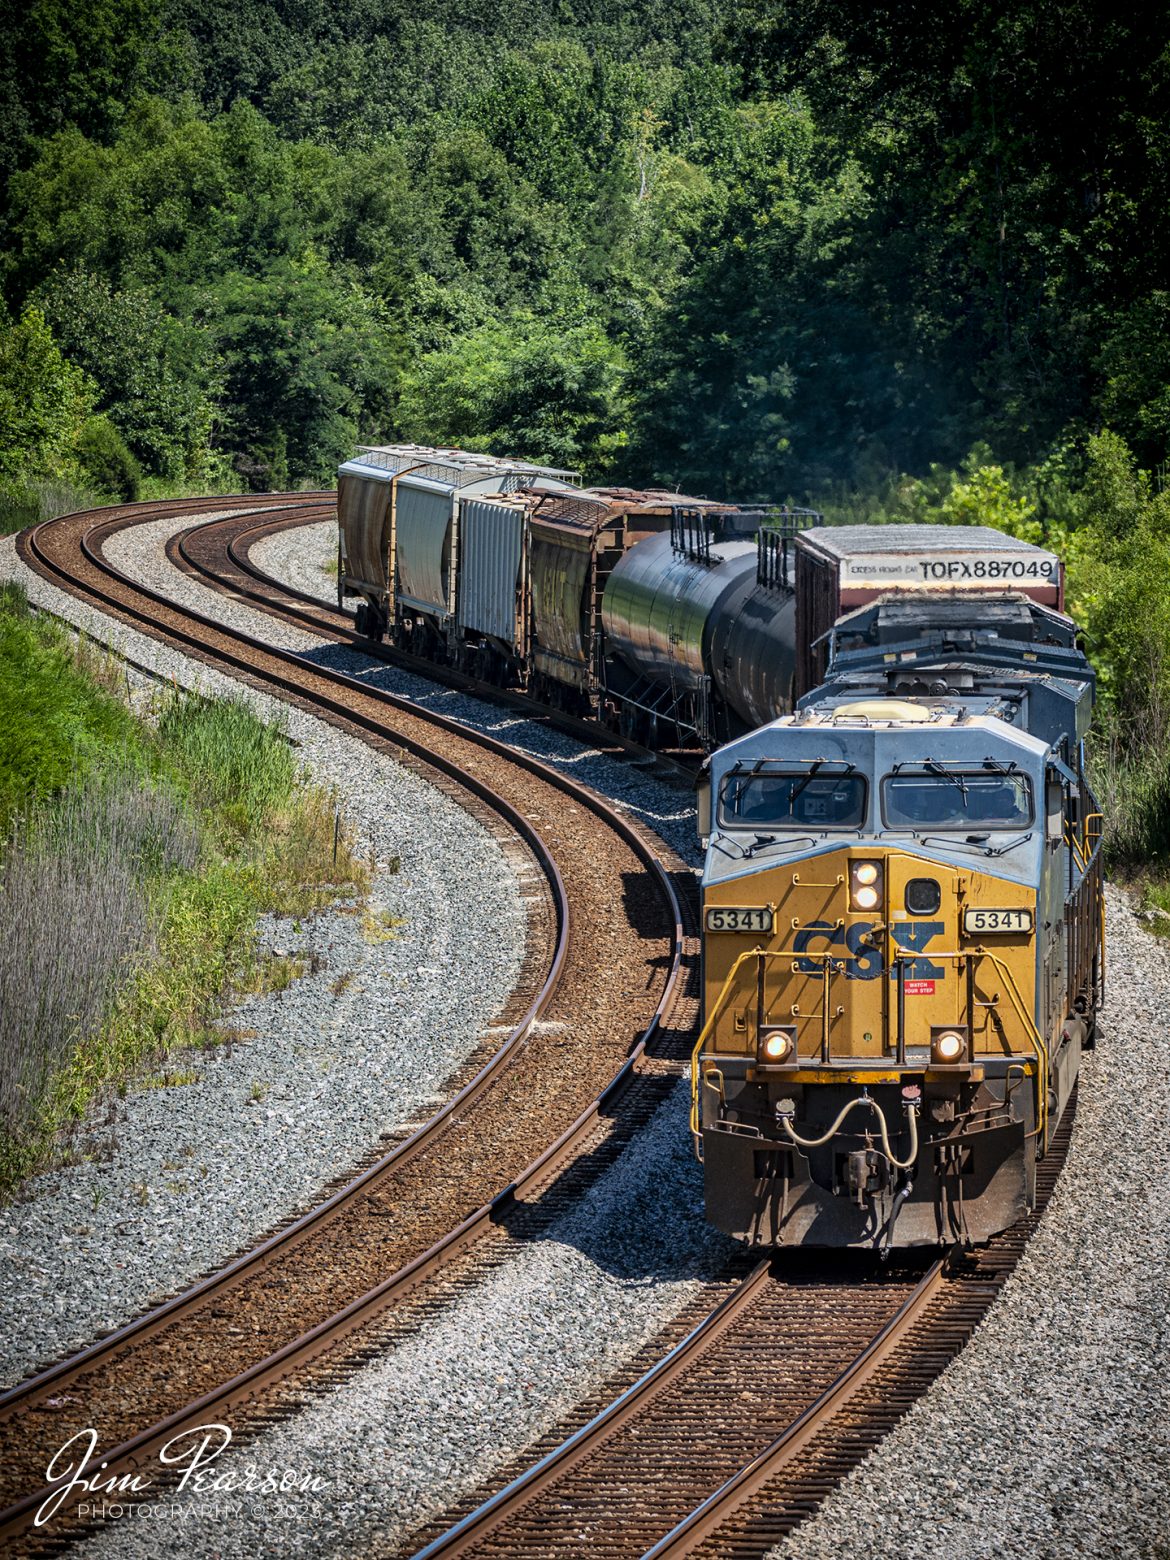 CSXT 5341 local, L391, makes their way through the S curve with its short train, as they make their way south at Nortonville, Kentucky on the Henderson Subdivision. This train runs daily between Casky Yard in Hopkinsville, Ky and Atkison Yard at Madisonville, Ky.

Tech Info: Nikon D800, Sigma 150-600 @150mm, f/5, 1/1000, ISO 280.

#trainphotography #railroadphotography #trains #railways #dronephotography #trainphotographer #railroadphotographer #jimpearsonphotography